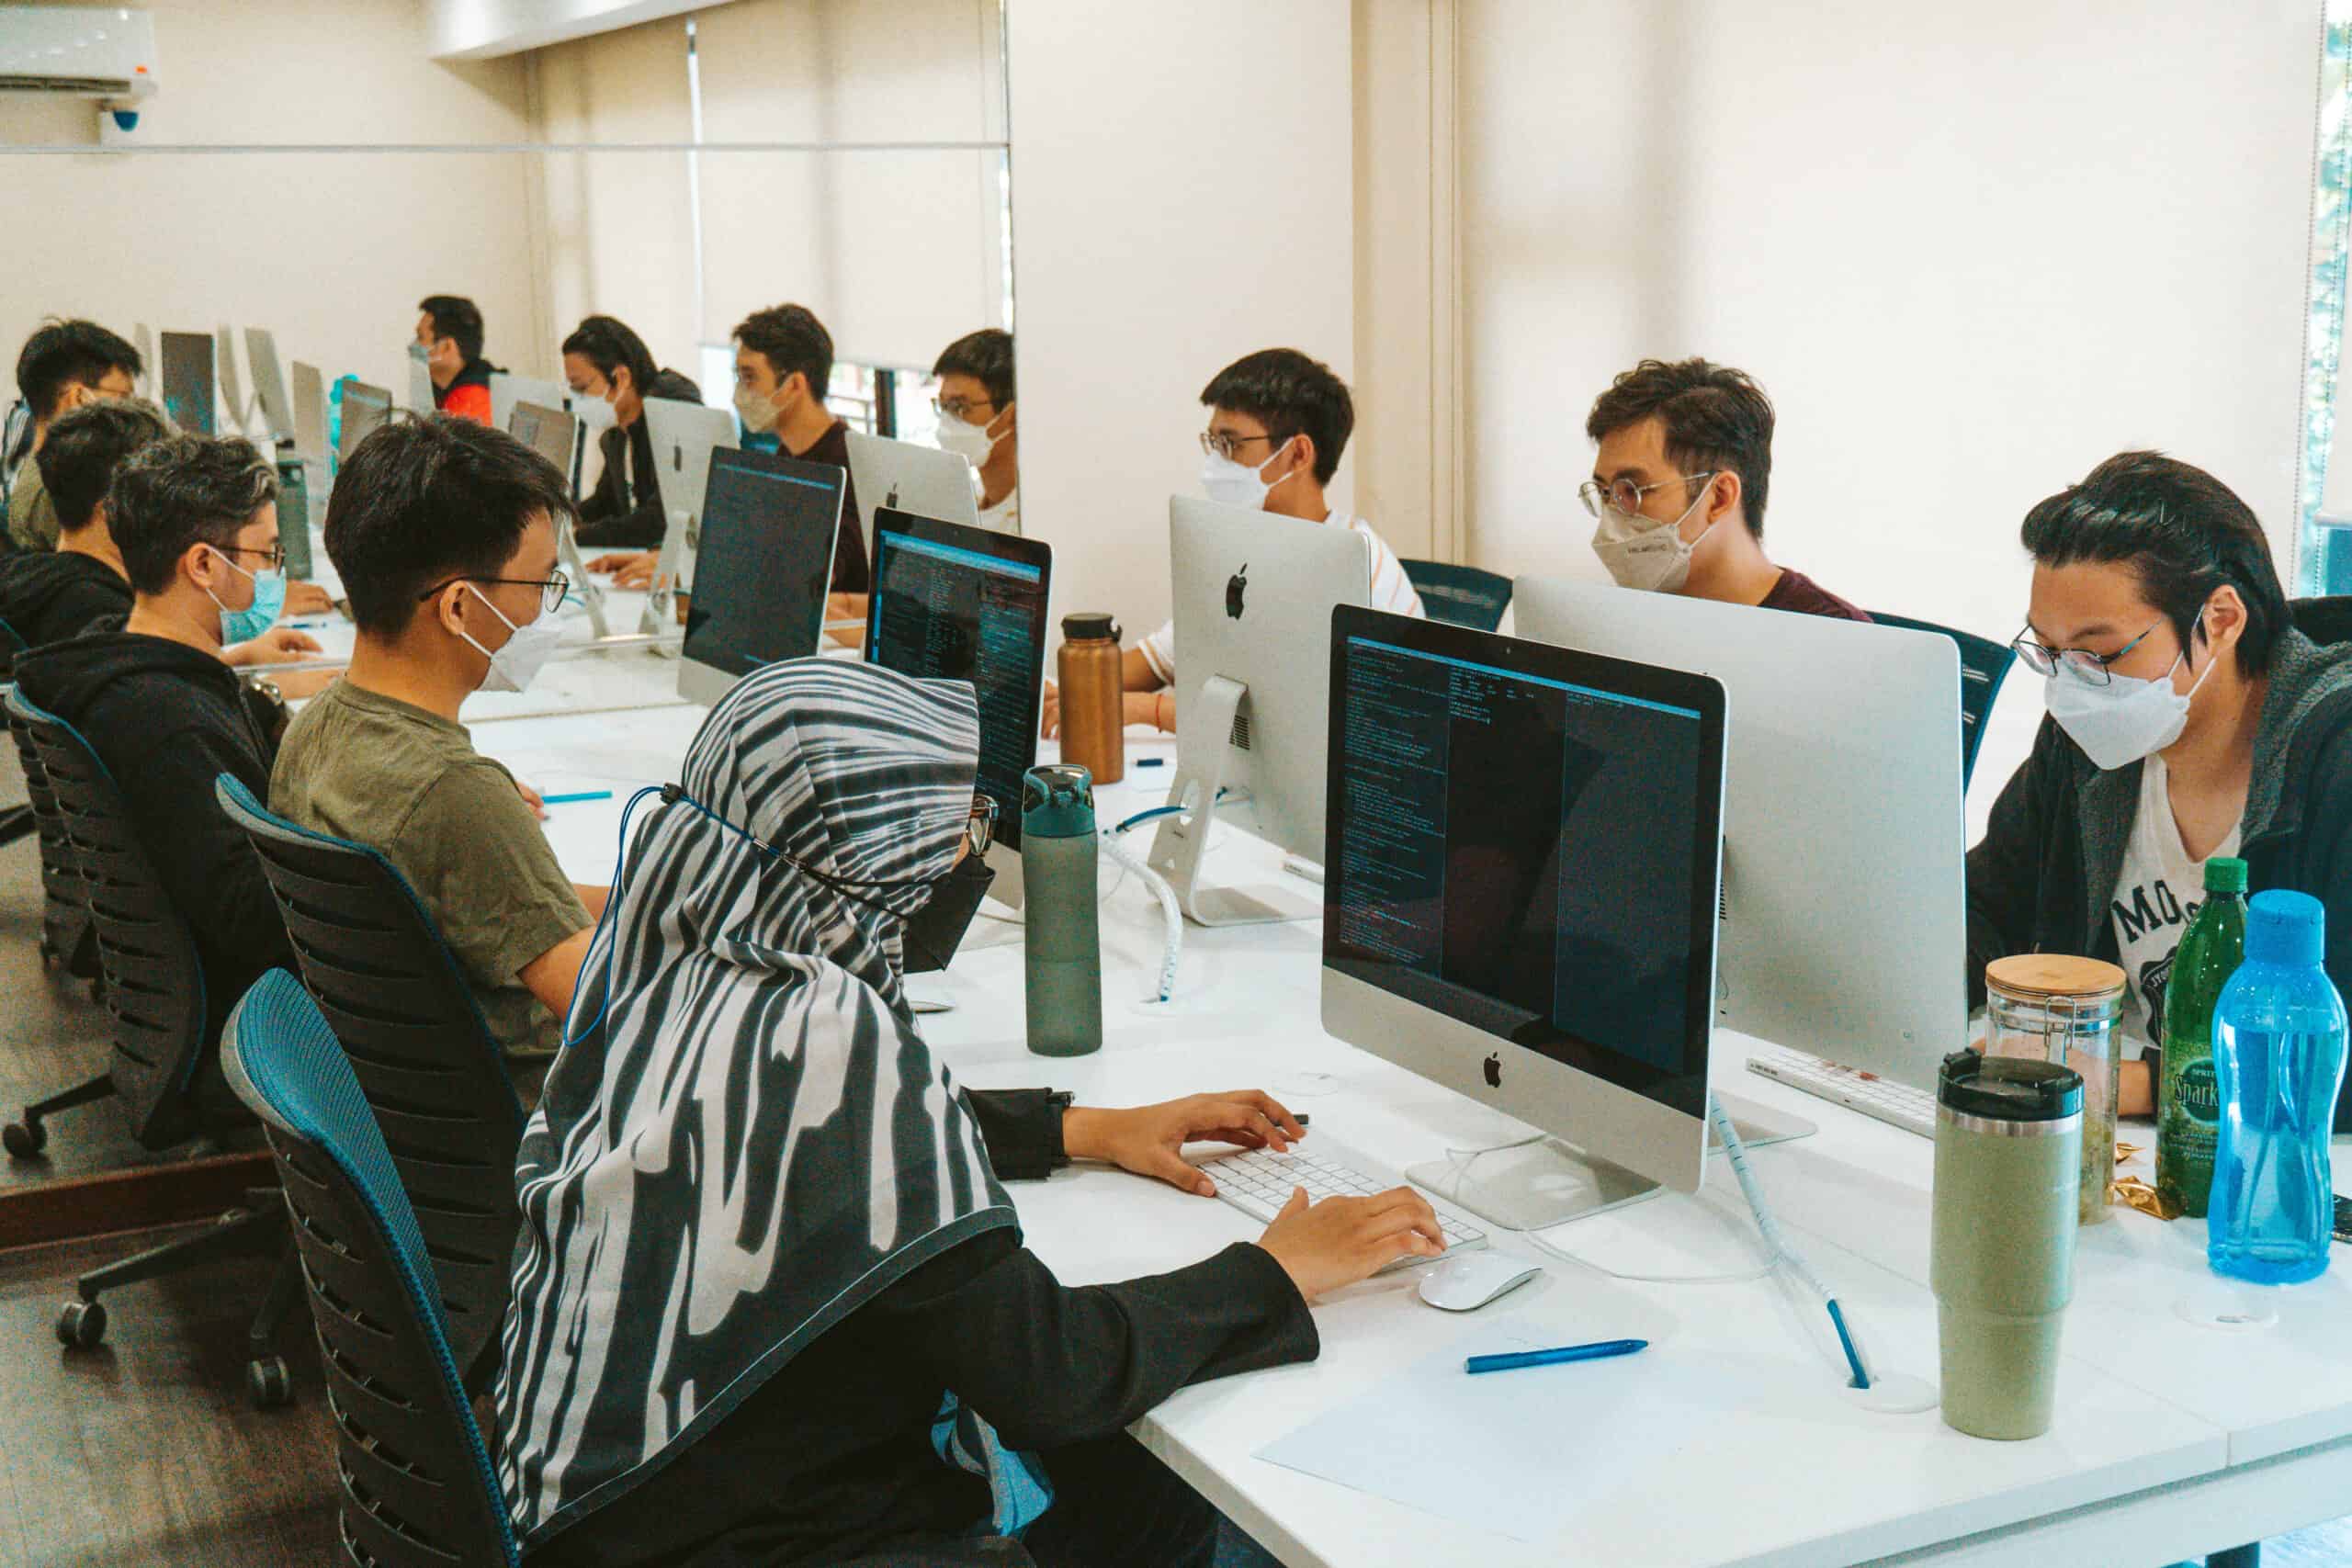 SUNWAY’S 42 ISKANDAR PUTERI CAMPUS OPENS APPLICATIONS FOR FREE 26-DAY CODING BOOTCAMPS